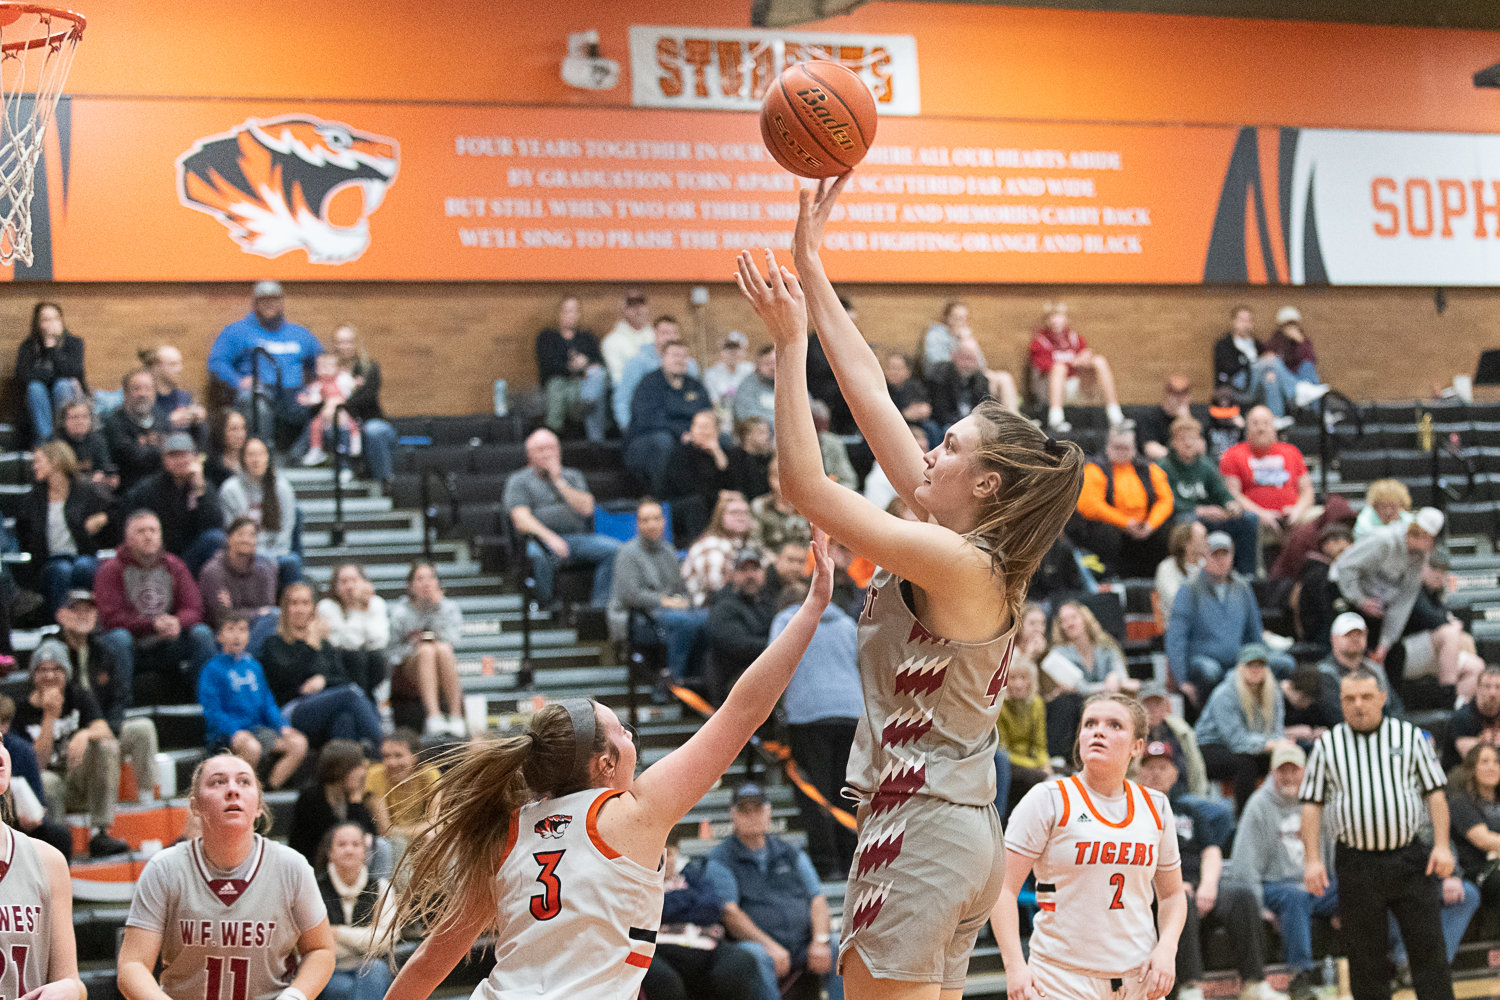 Julia Dalan hits a turnaround jumper in the post during W.F. West's 71-23 win over Centralia on Feb. 1.